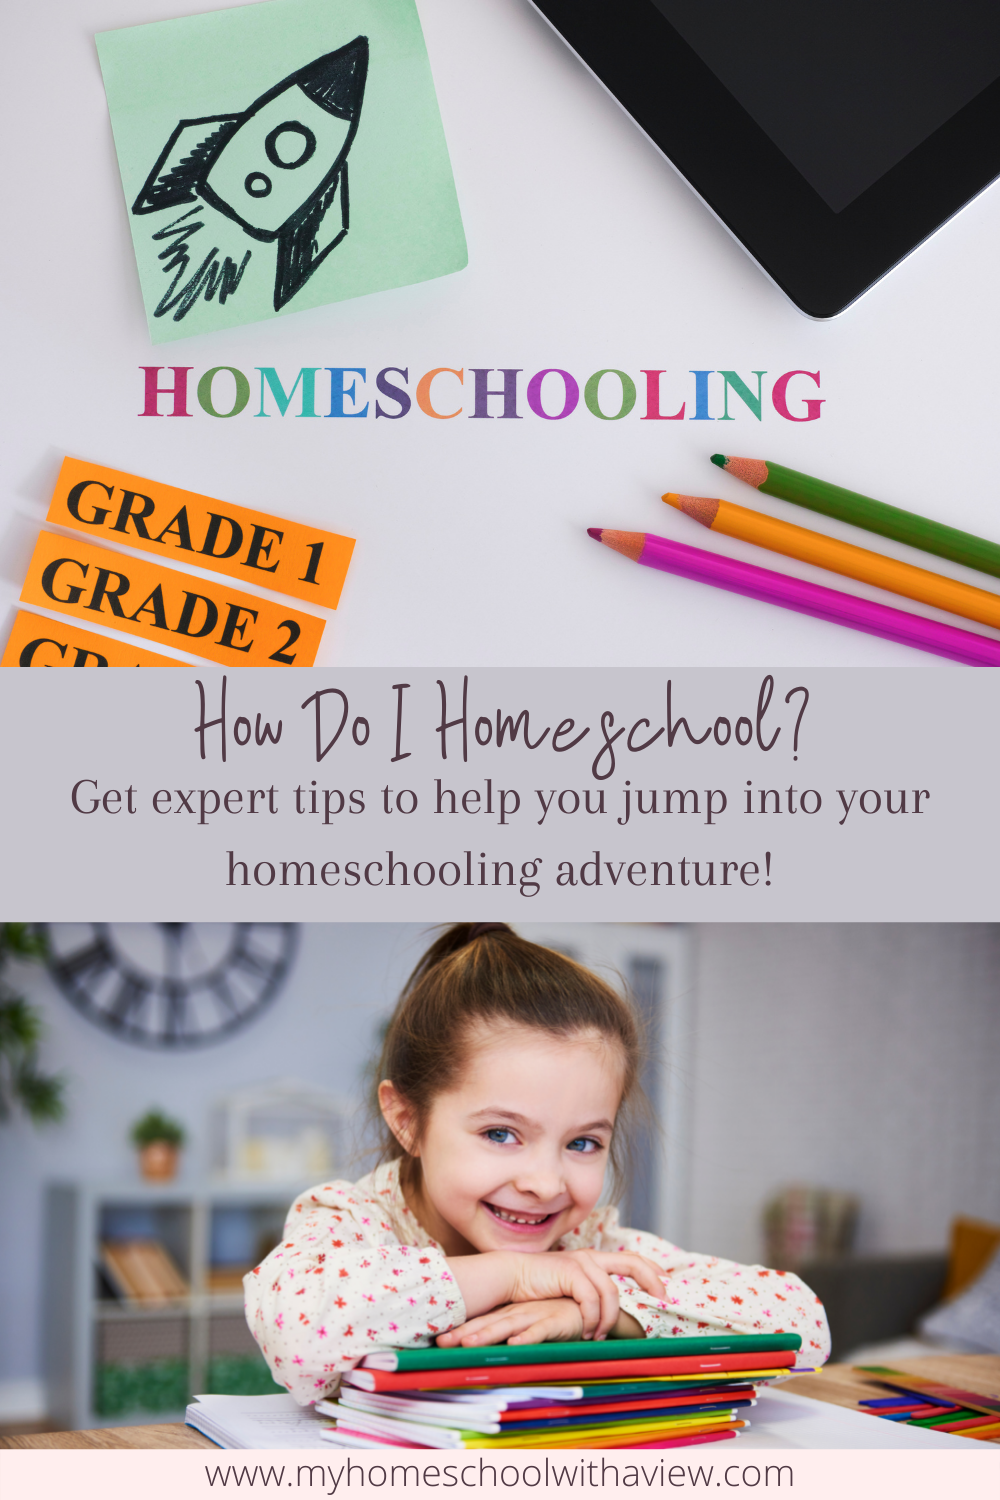 Pin to your homeschool boards